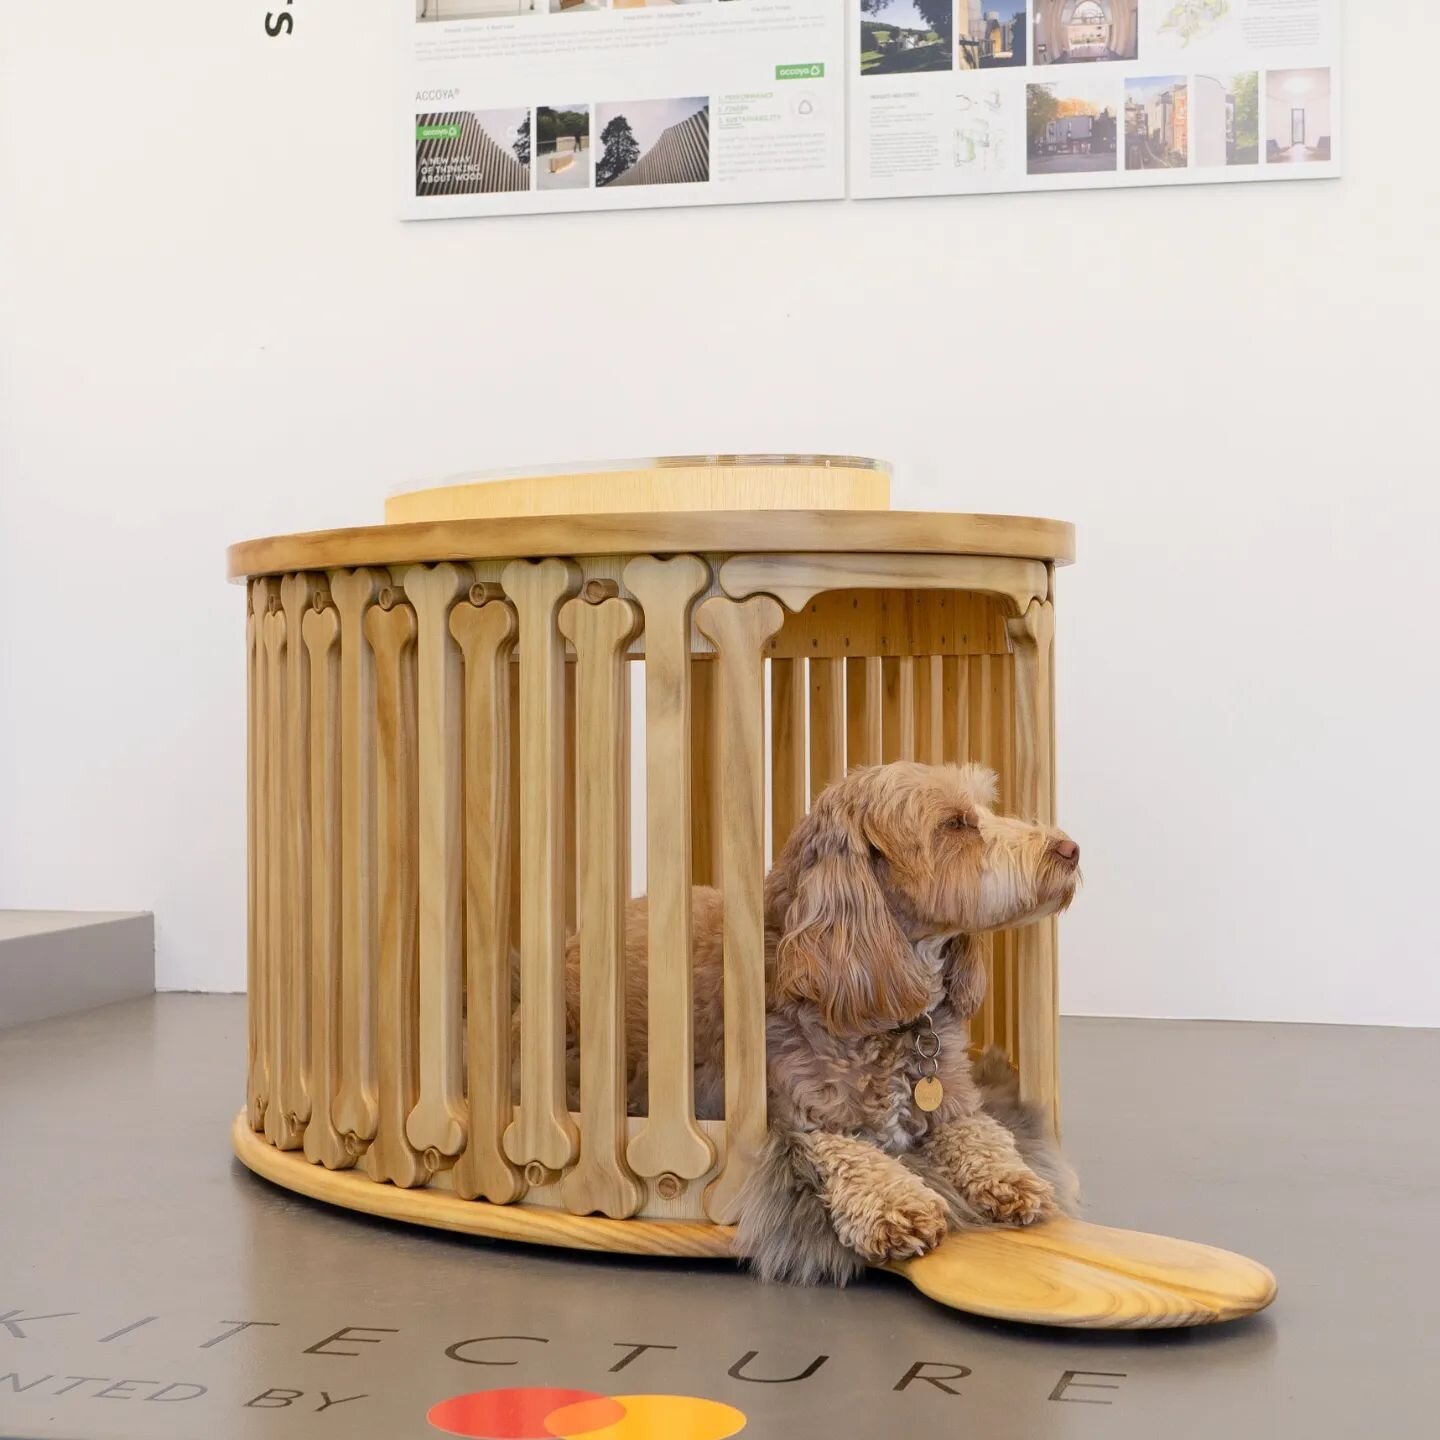 We are delighted to announce that our competition entry BONEHENGE has won the 2022 Goodwoof Barkitecture against a very strong field of entries by prominent architects.

The competition and our winning design are featured in the Architects' Journal, 